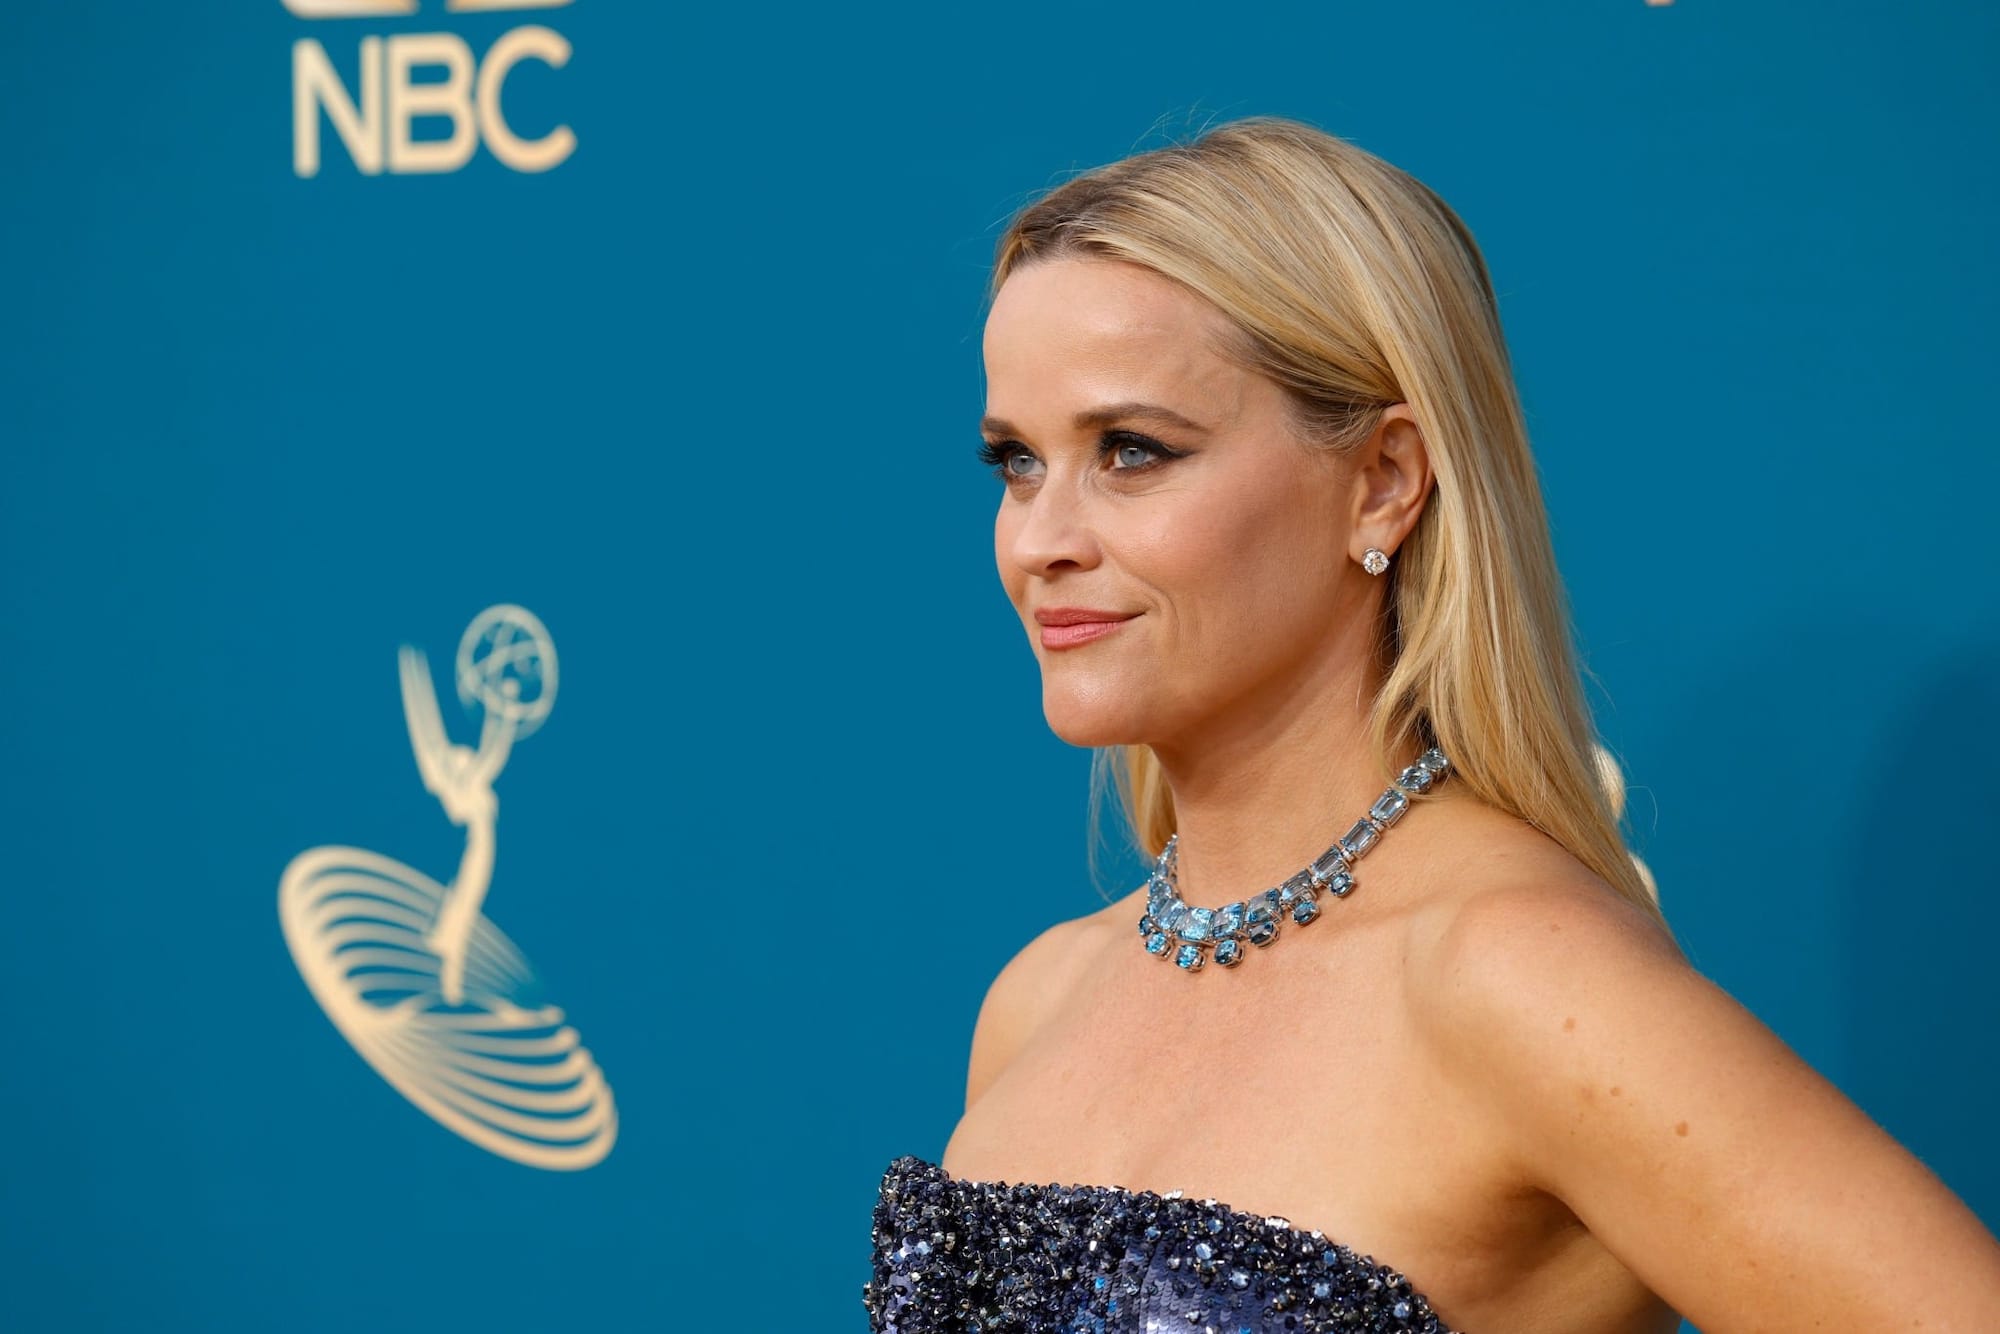 Reese Witherspoon in a beautiful Tiffany & Co. necklace on the red carpet.